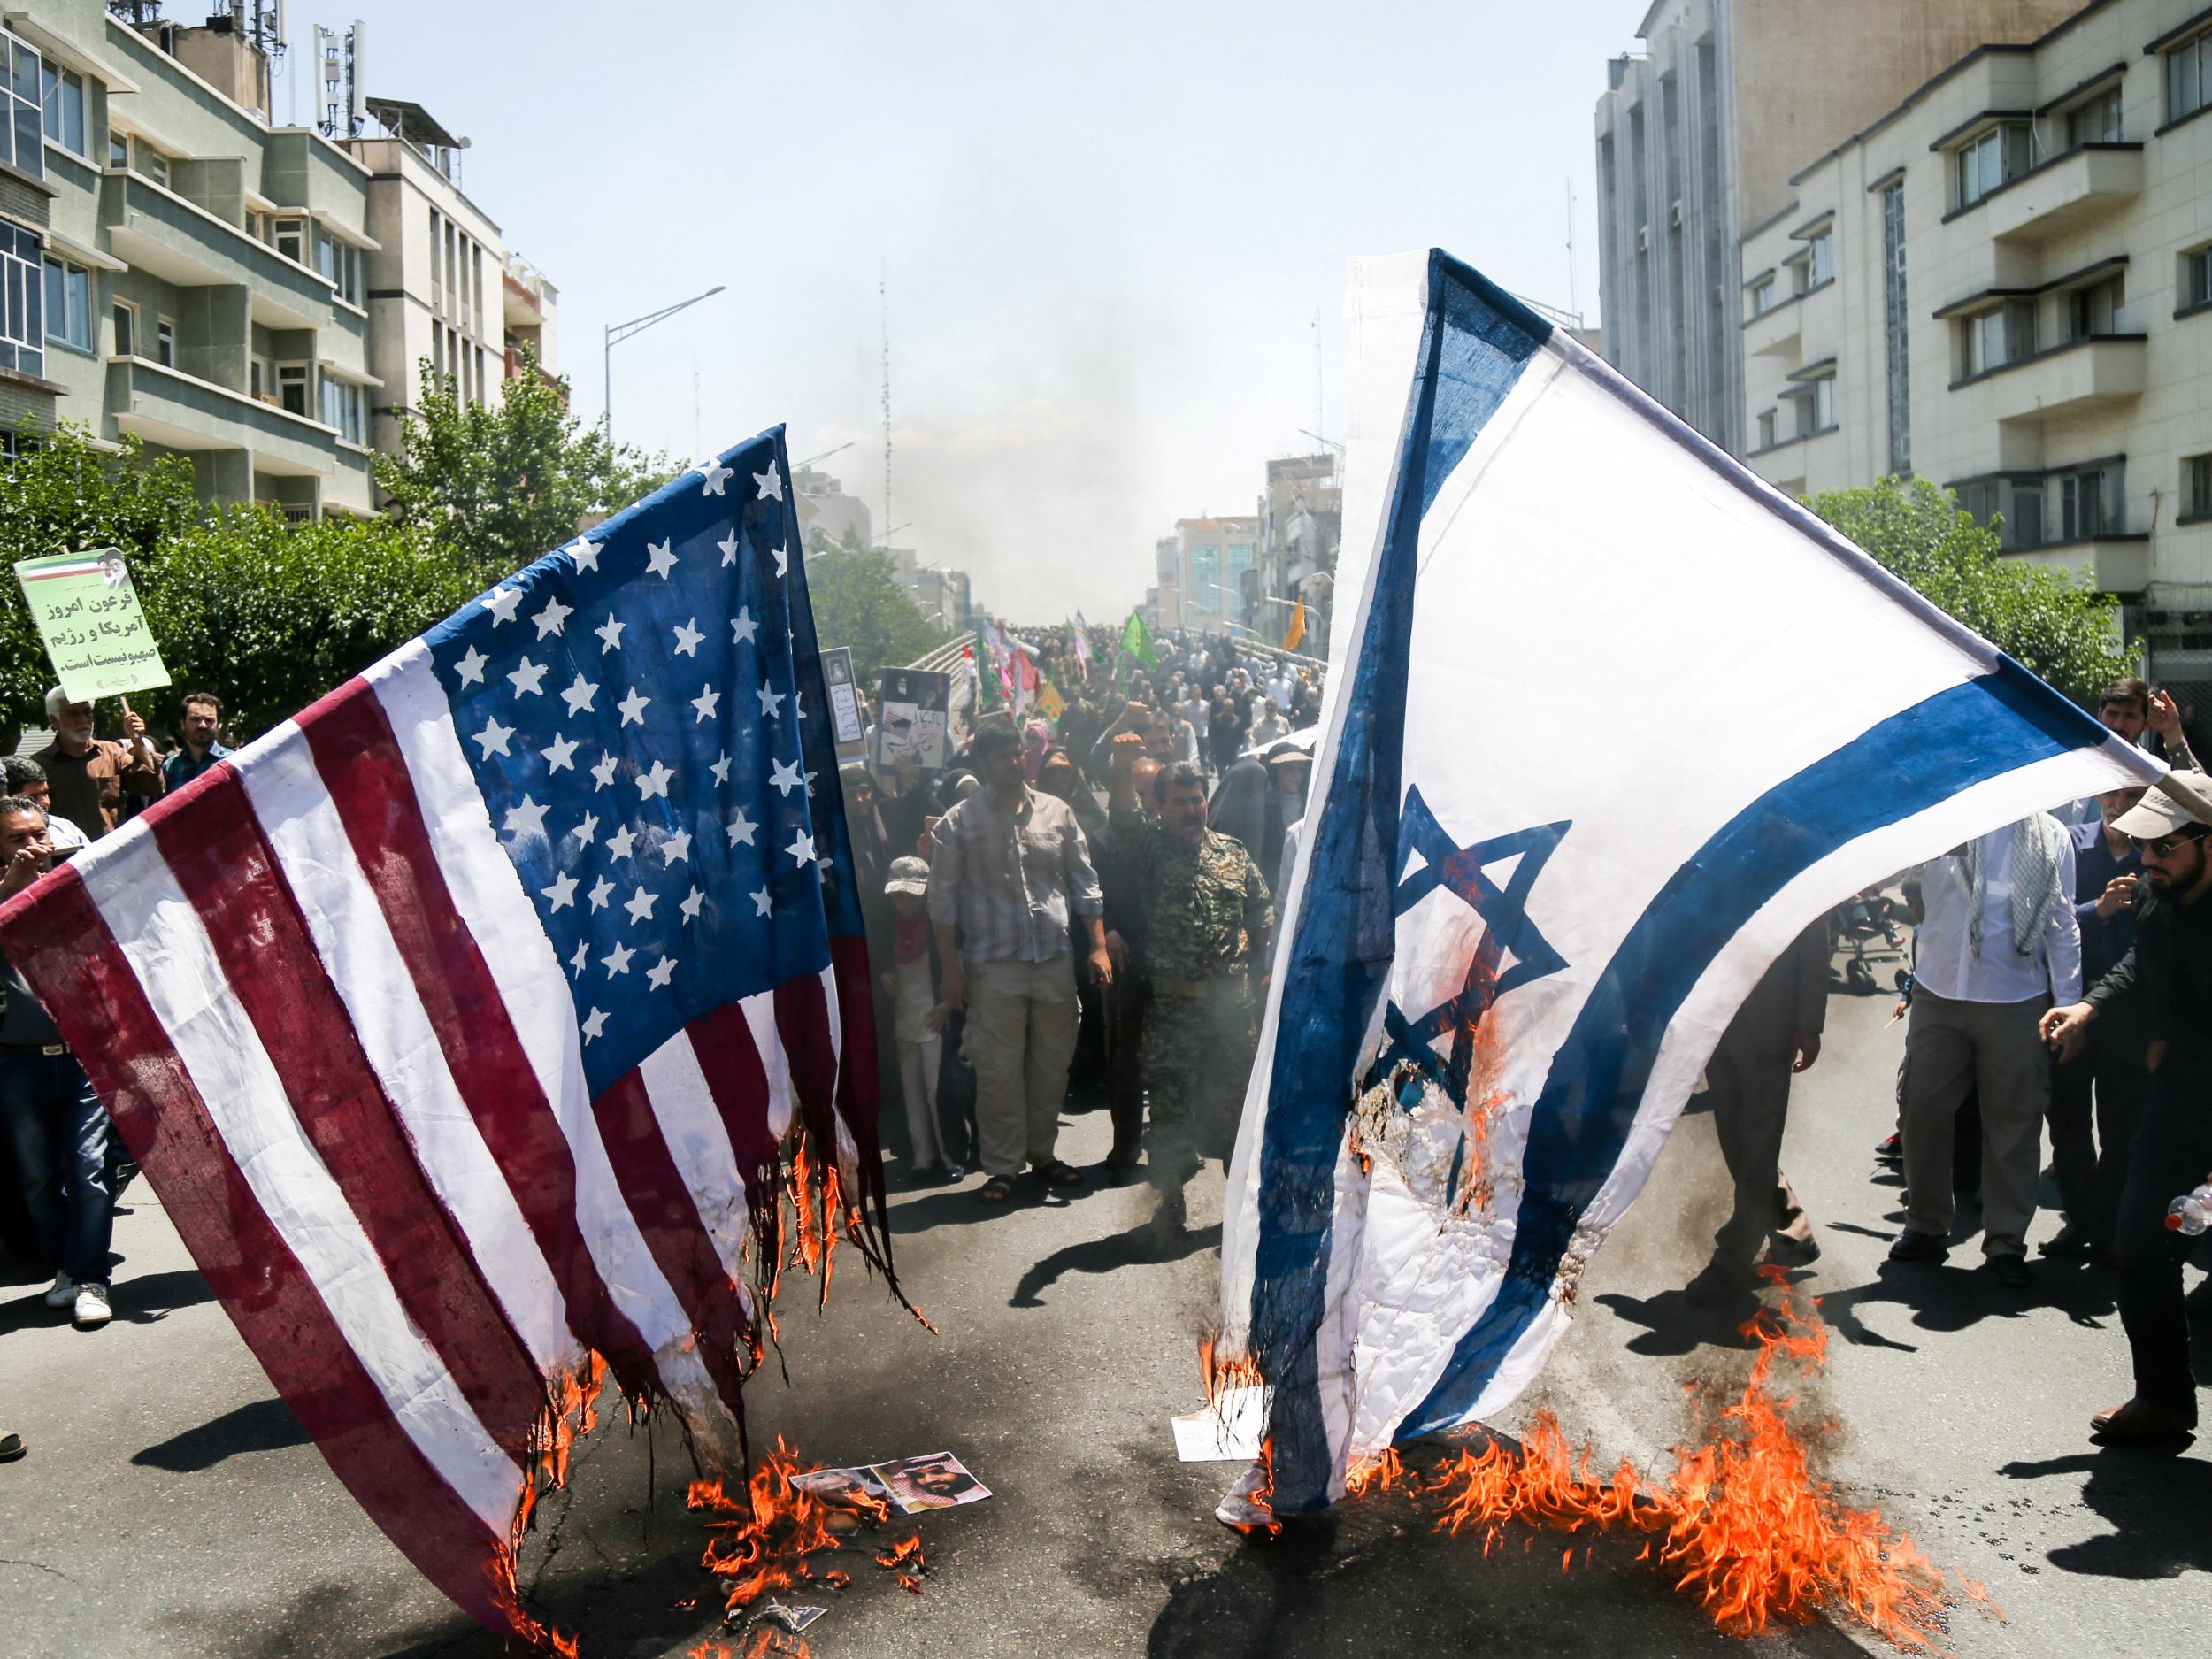 Iranians burn US and Israel flags during a protest marking the annual Quds Day on the last Friday of the holy month of Ramadan in Tehran, Iran